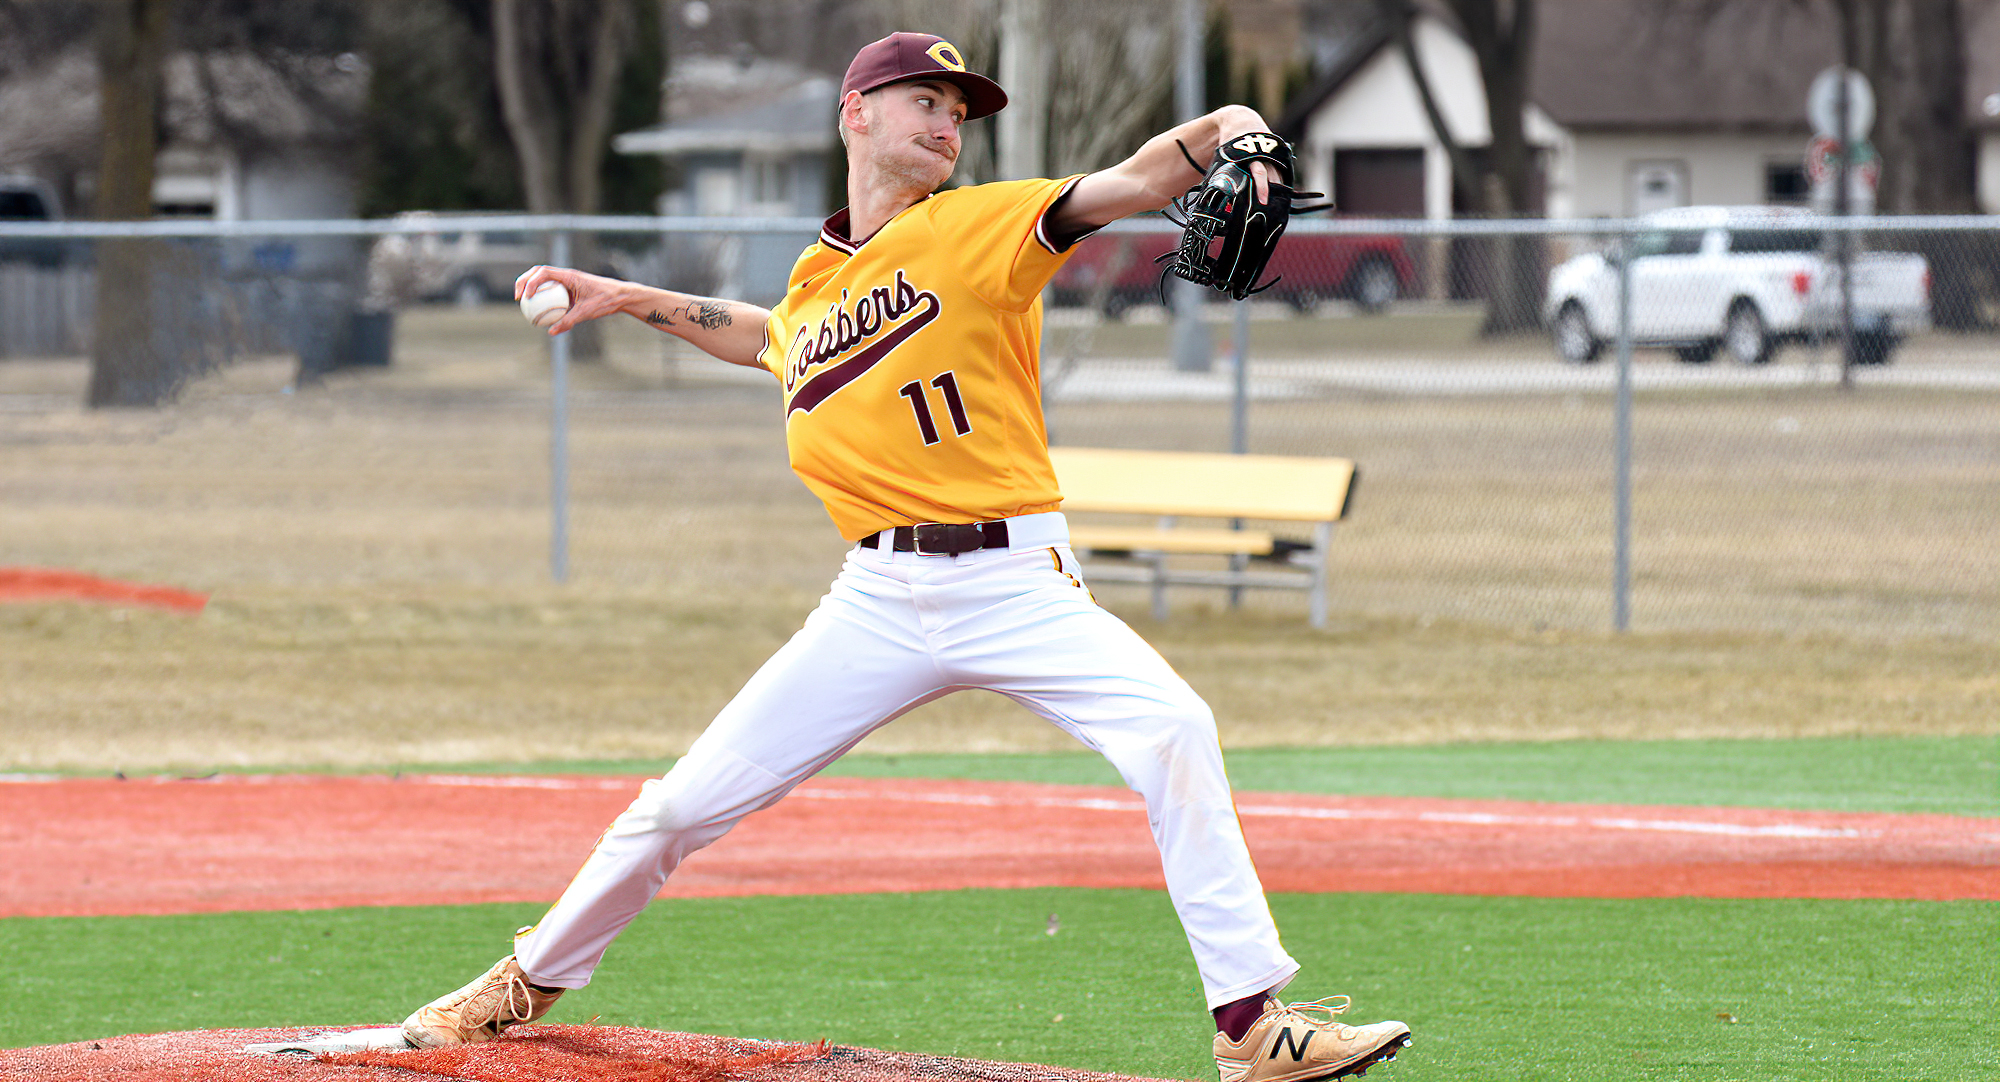 Junior Ashwin Stratton pitched a complete-game, 3-hitter in the Cobbers' 9-0 win in the first game against St. Scholastica.